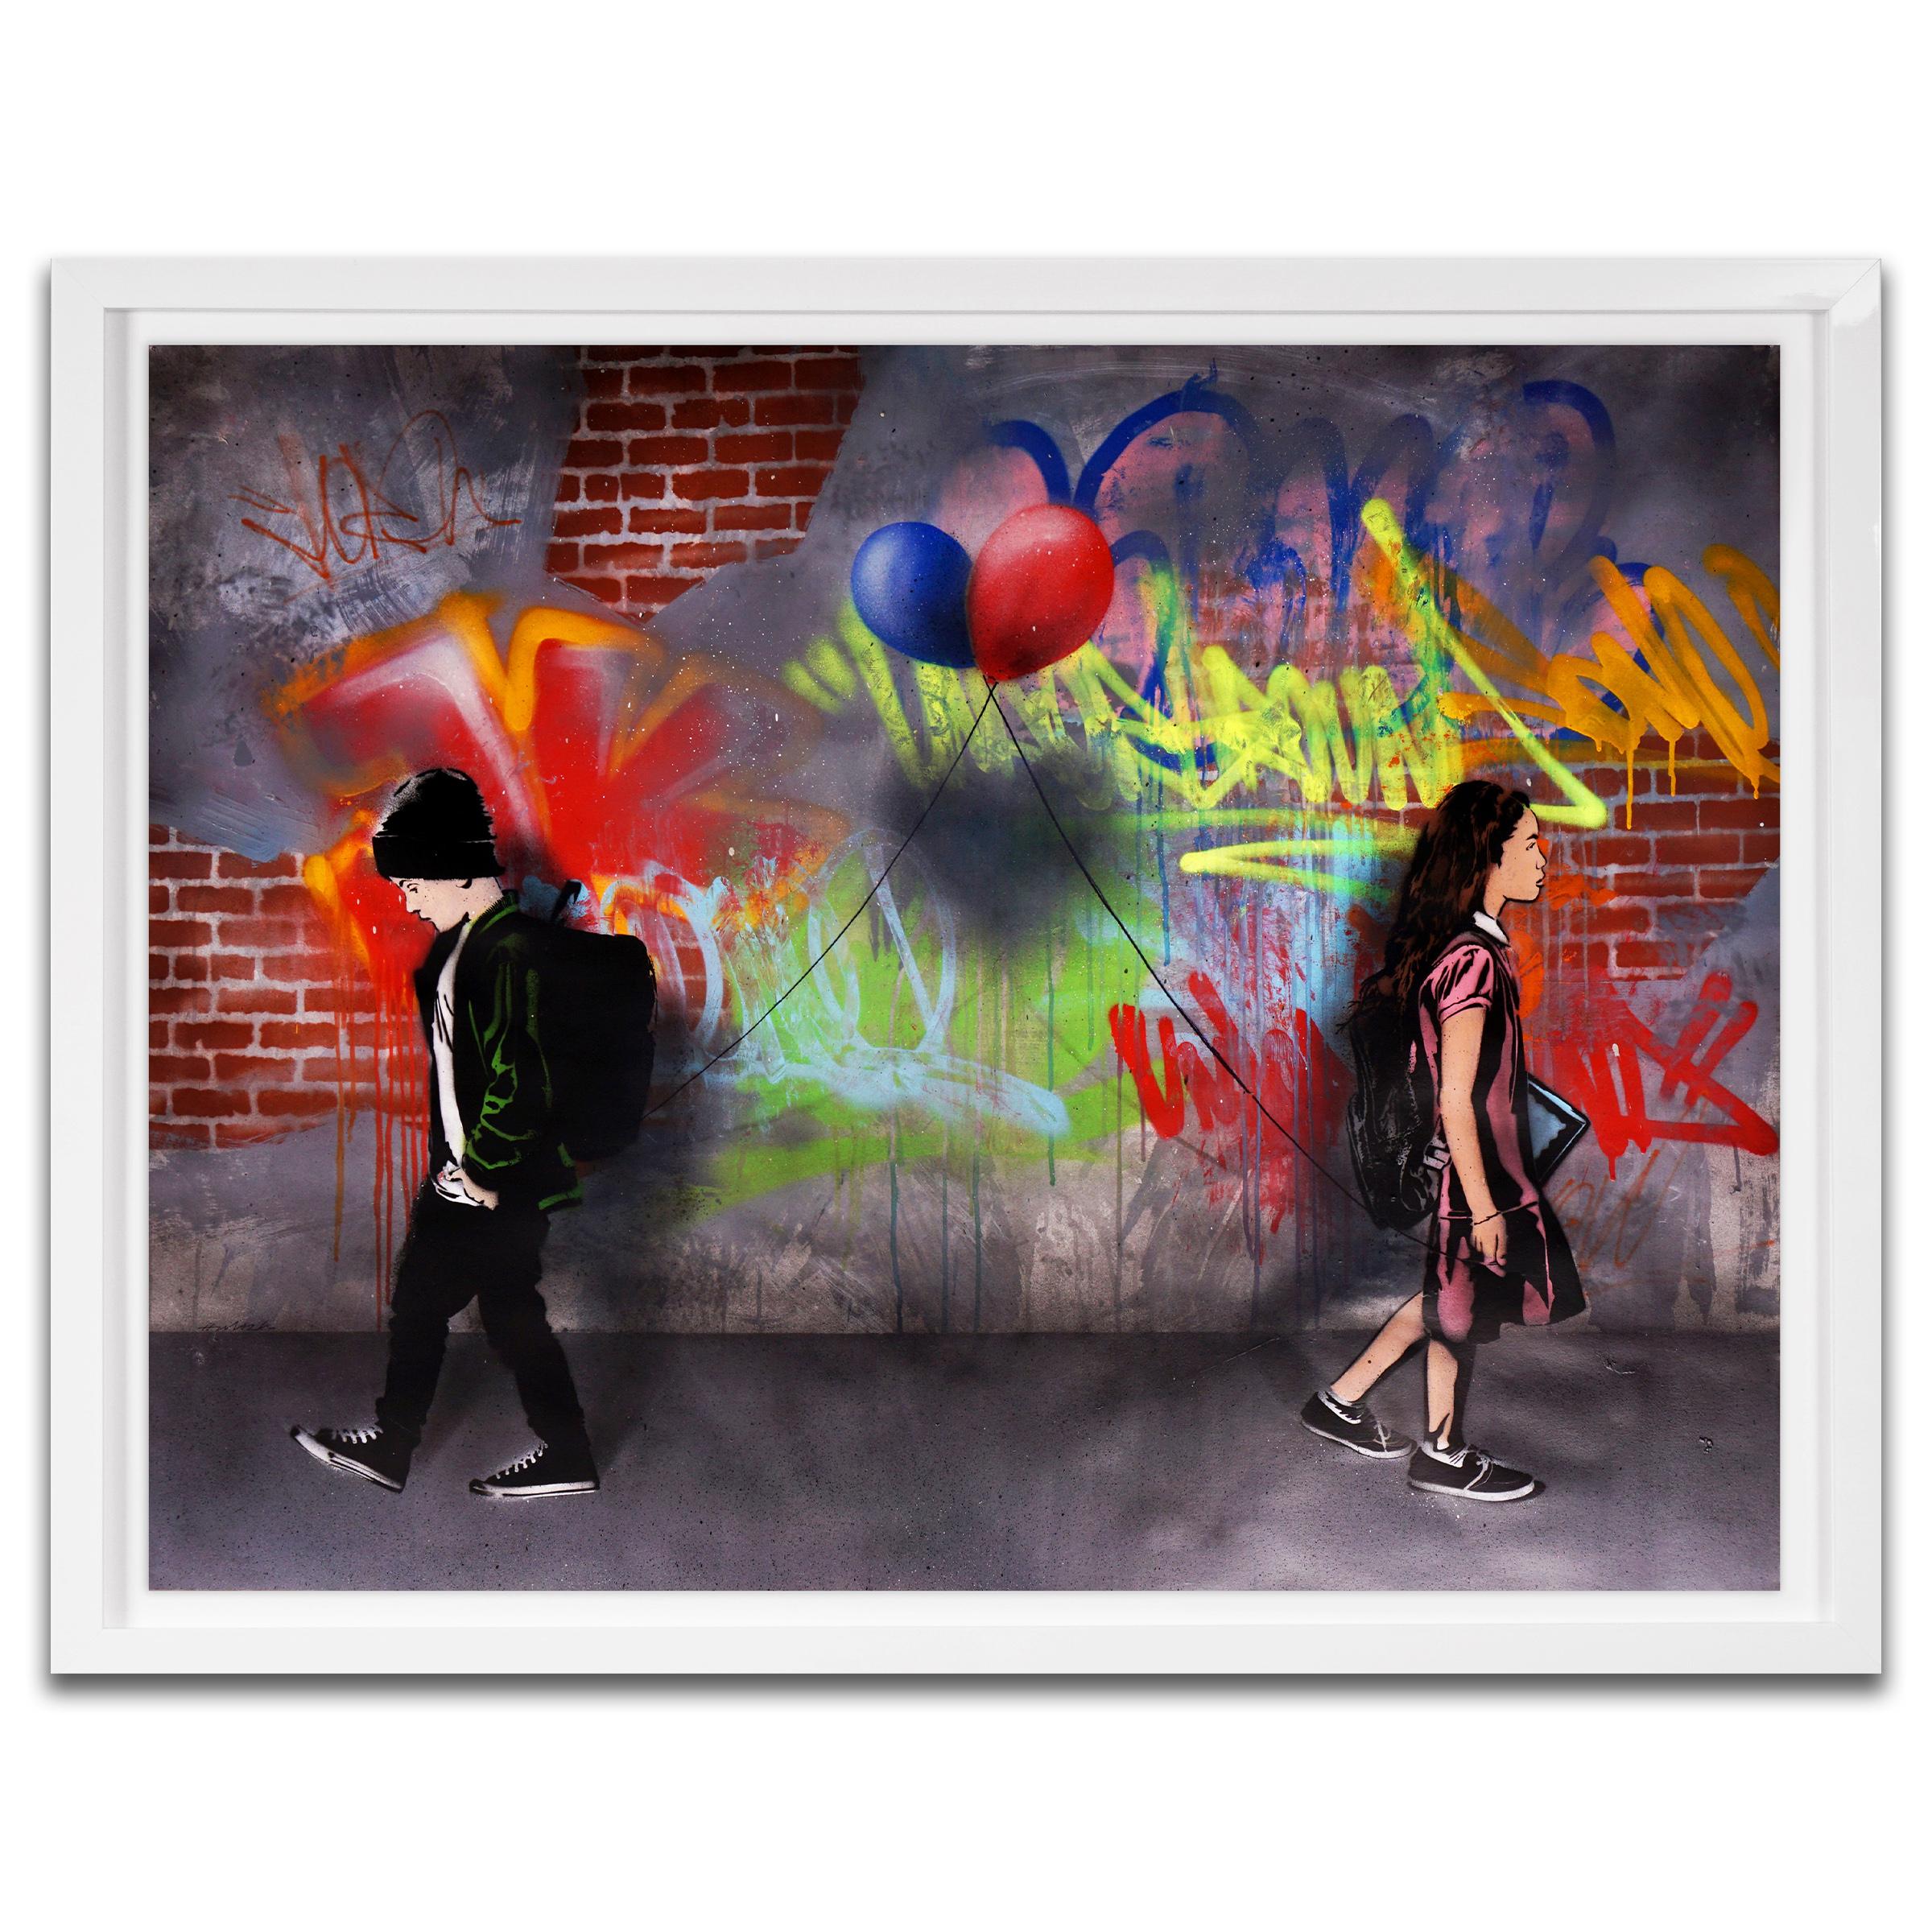 'Static Love with Balloons' Graffiti Street Art Painting, Unique, 2021 - Mixed Media Art by Hijack